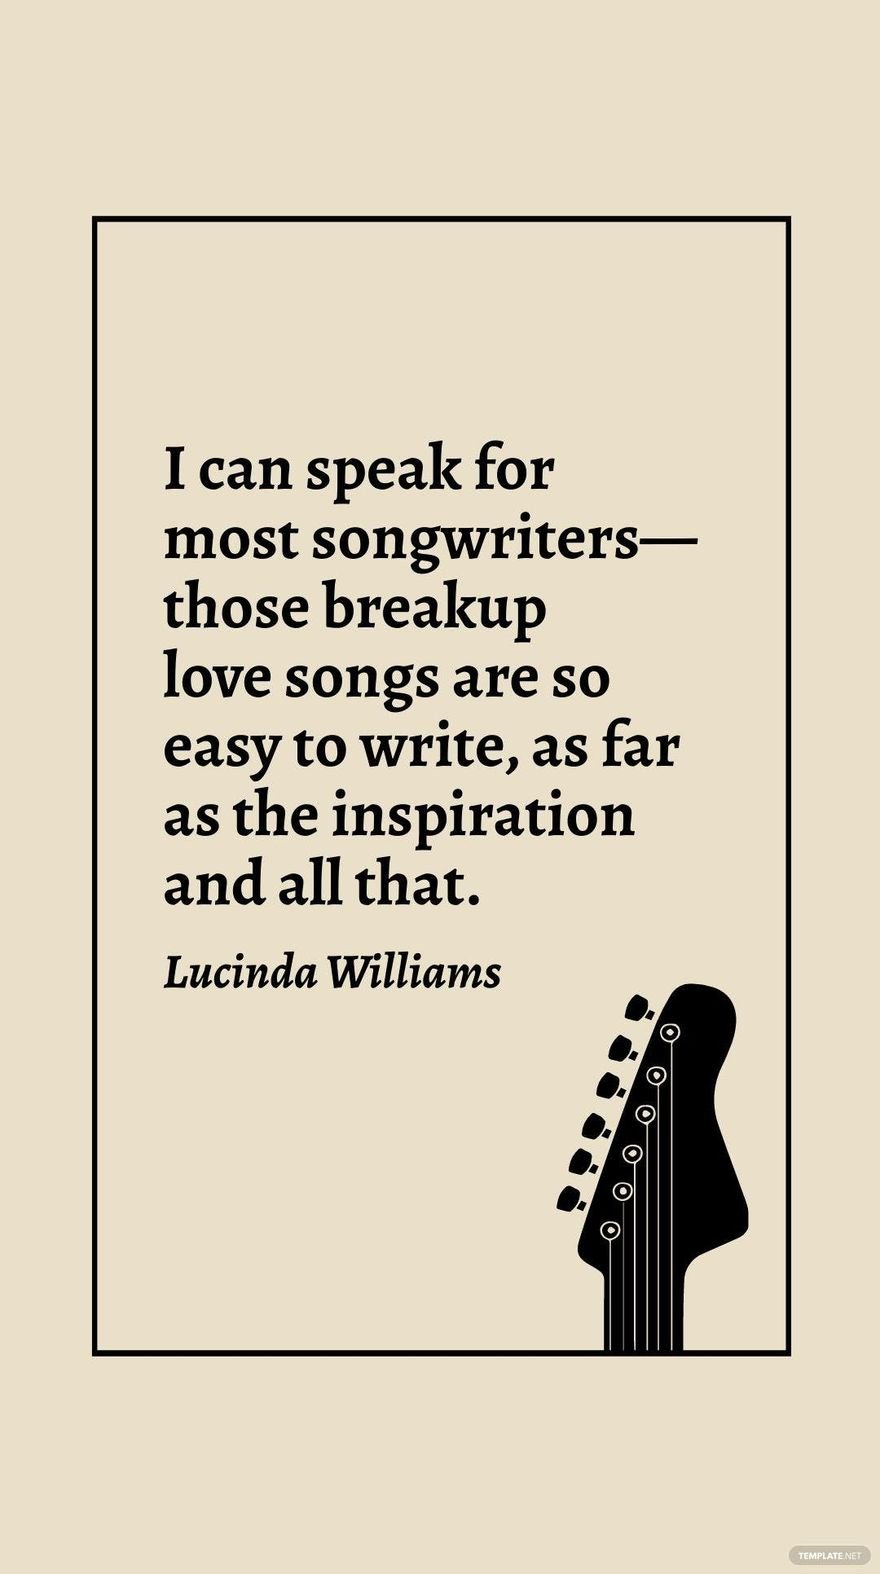 Free Lucinda Williams - I can speak for most songwriters - those breakup love songs are so easy to write, as far as the inspiration and all that. in JPG